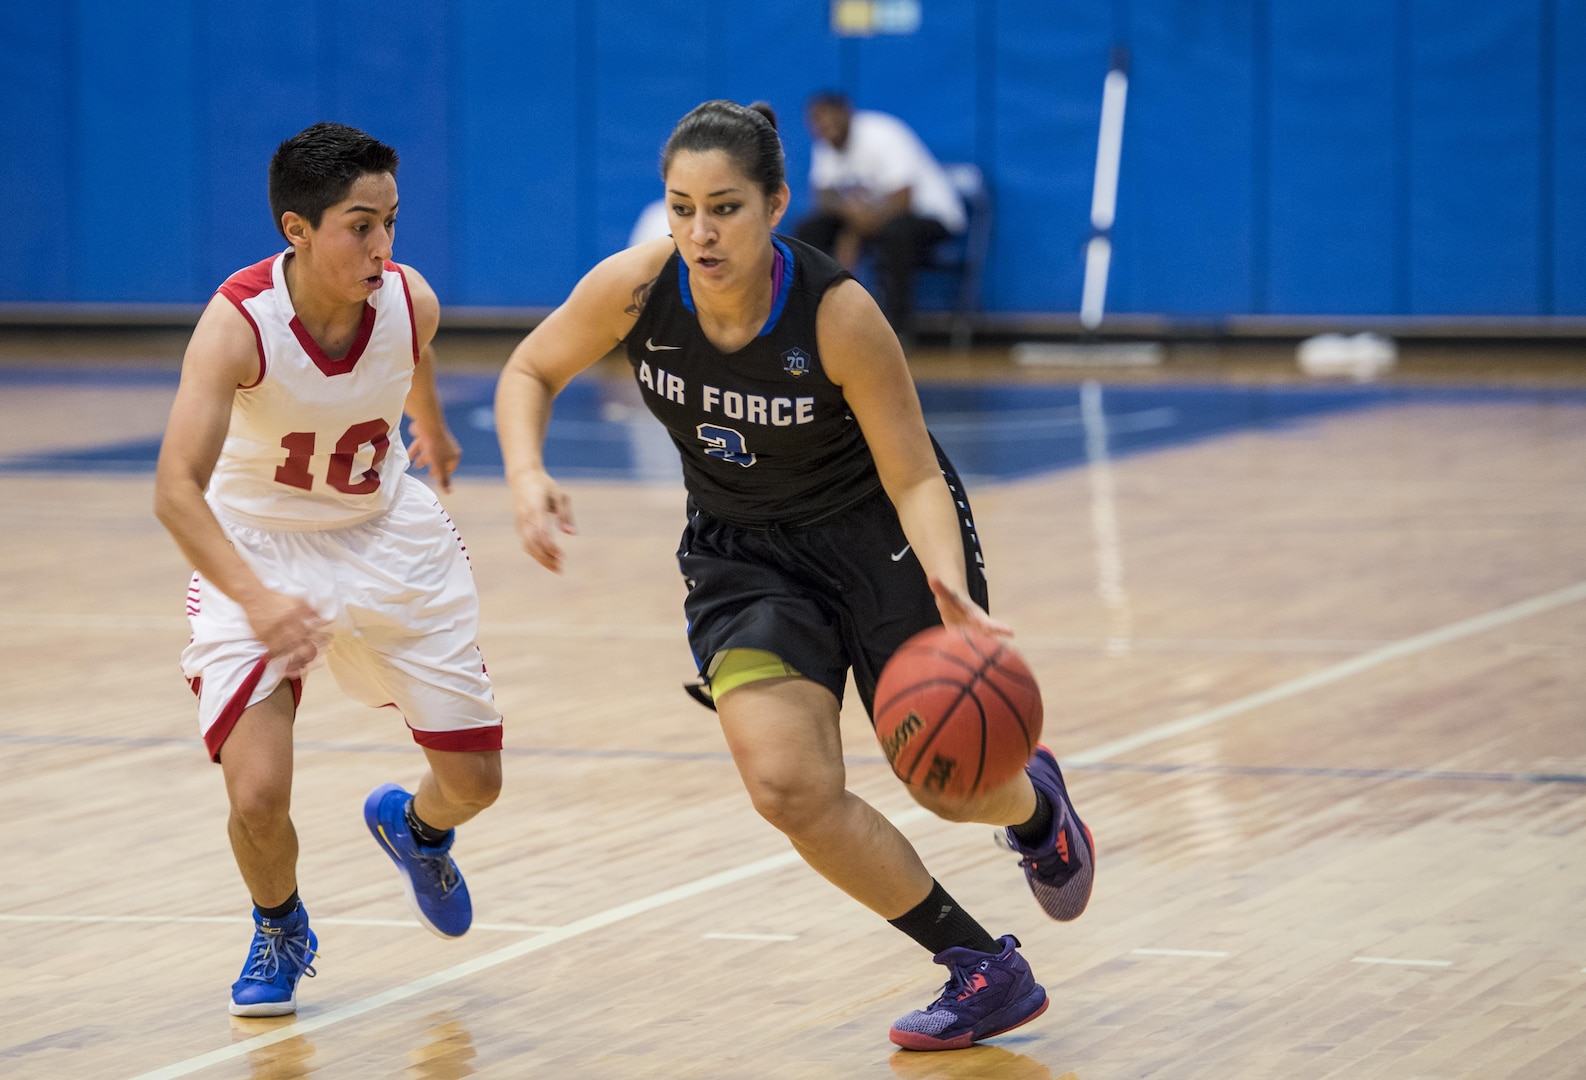 SAN ANTONIO (Nov. 03, 2017) - U.S. Airforce Ssgt. Cinnamon Kava, assigned to Travis Air Force Base, dribbles the ball during a basketball game. The 2017 Armed Forces Basketball Championship is held at Joint Base San Antonio, Lackland Air Force Base from 1-7 November. The best two teams during the double round robin will face each other for the 2017 Armed Forces crown. (U.S. Navy photo by Mass Communication Specialist 2nd Class Emiline L. M. Senn/Released)